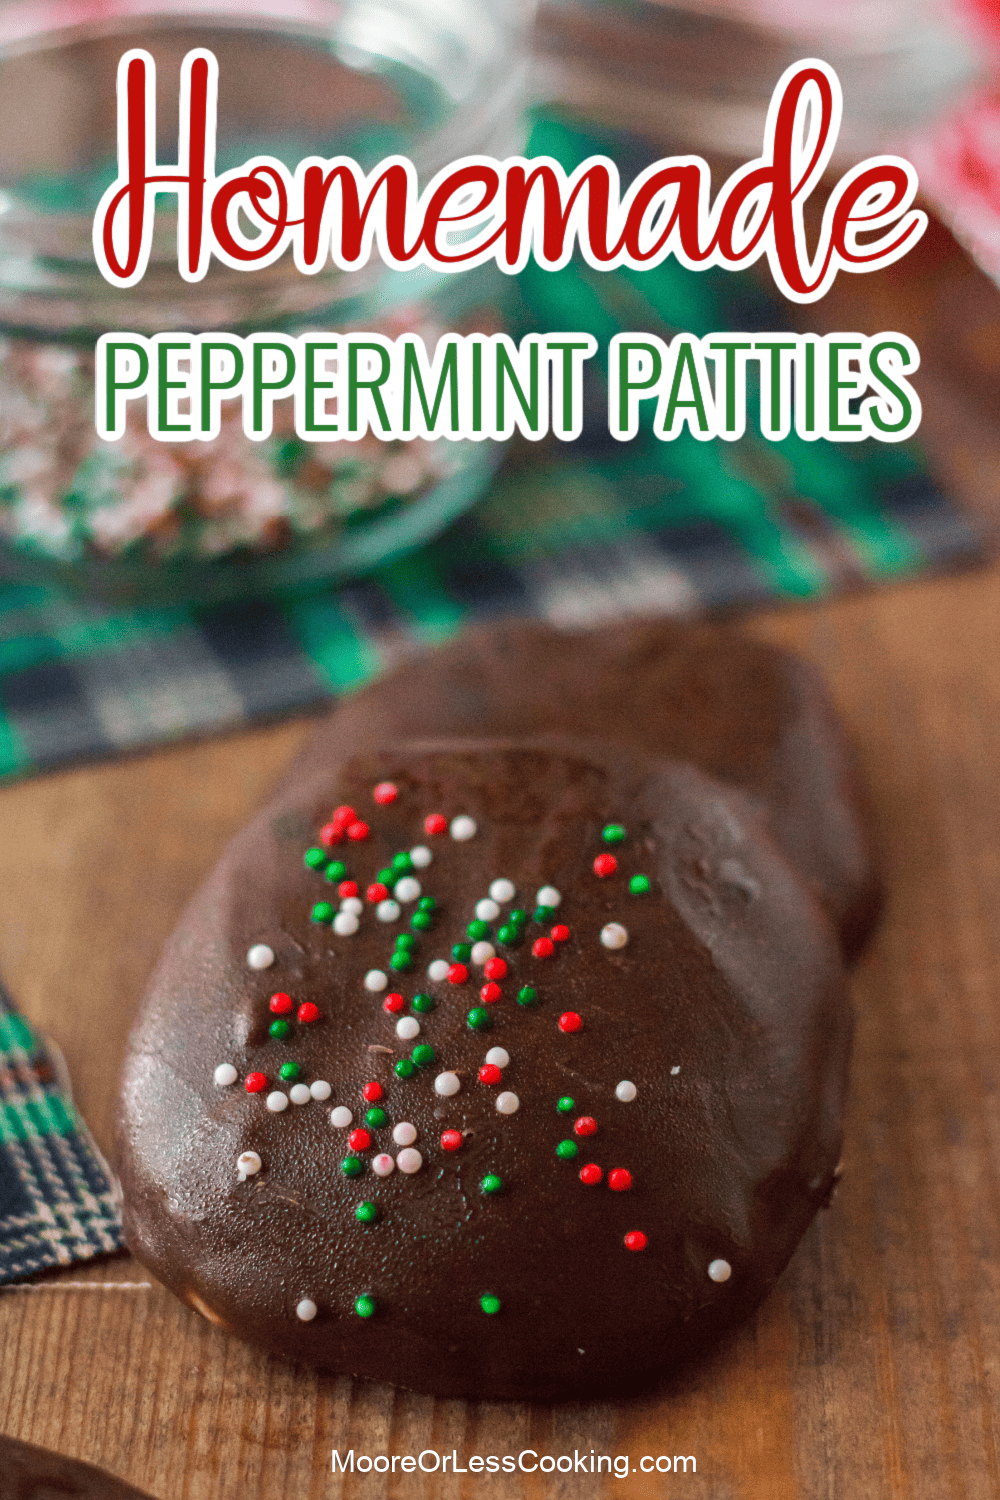 Peppermint is often associated with the holidays, but don't wait to make these chocolate-coated peppermint candies - you only need 4 ingredients to make them! Once you see how simple they are to make, you'll find all sorts of occasions to whip up a batch and enjoy them. via @Mooreorlesscook